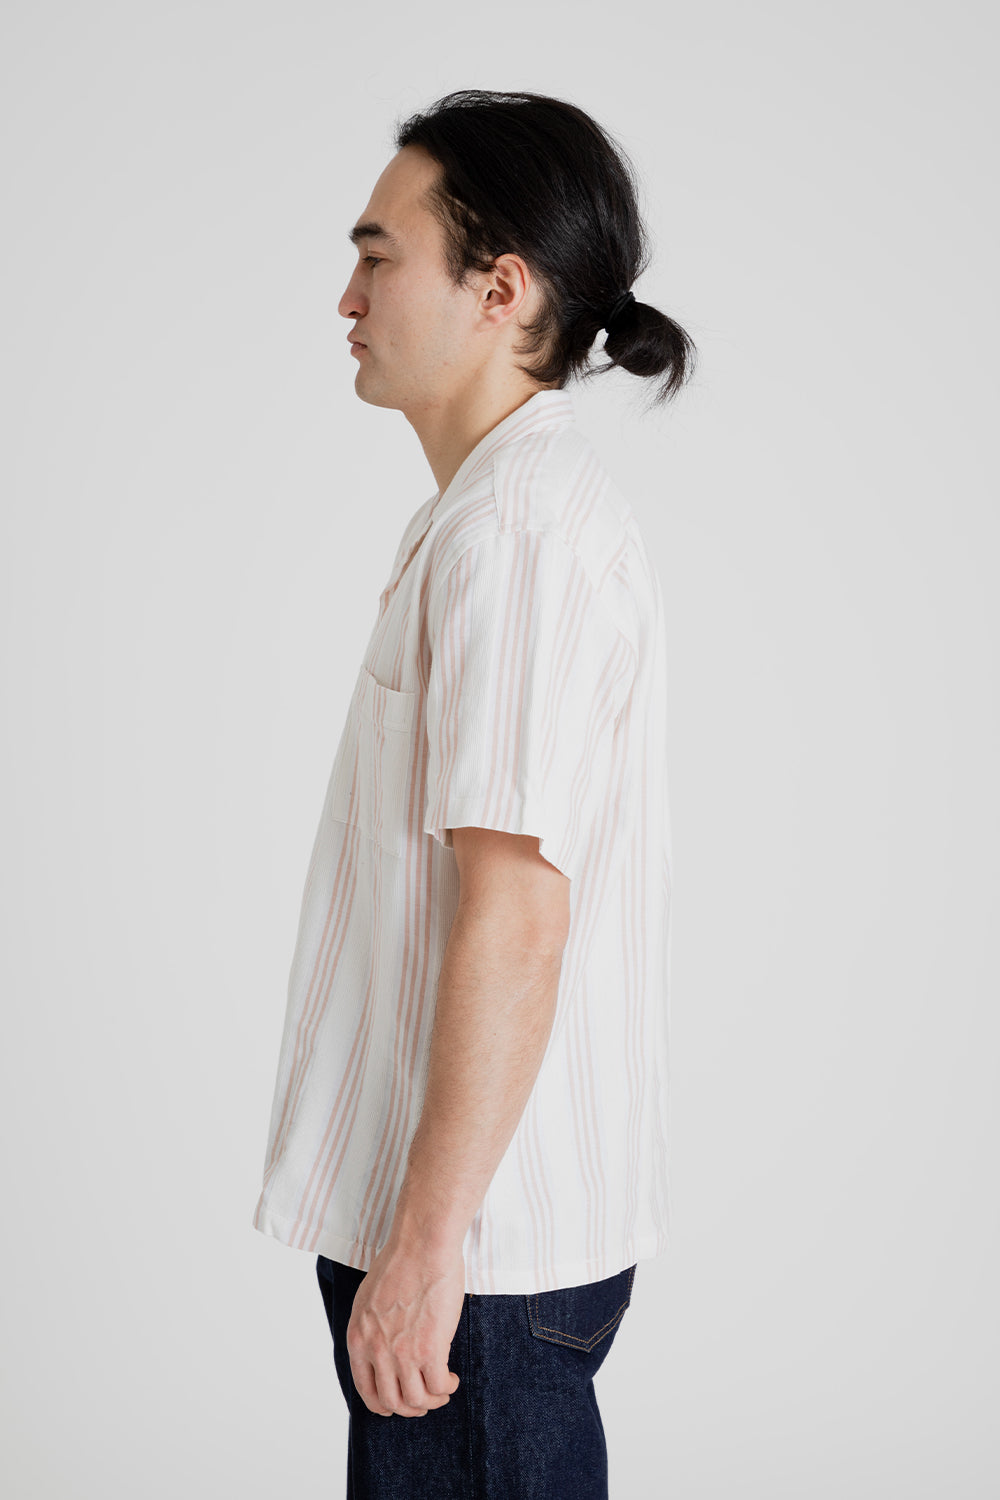 Foret Twig Shirt in Cloud and Sandstone